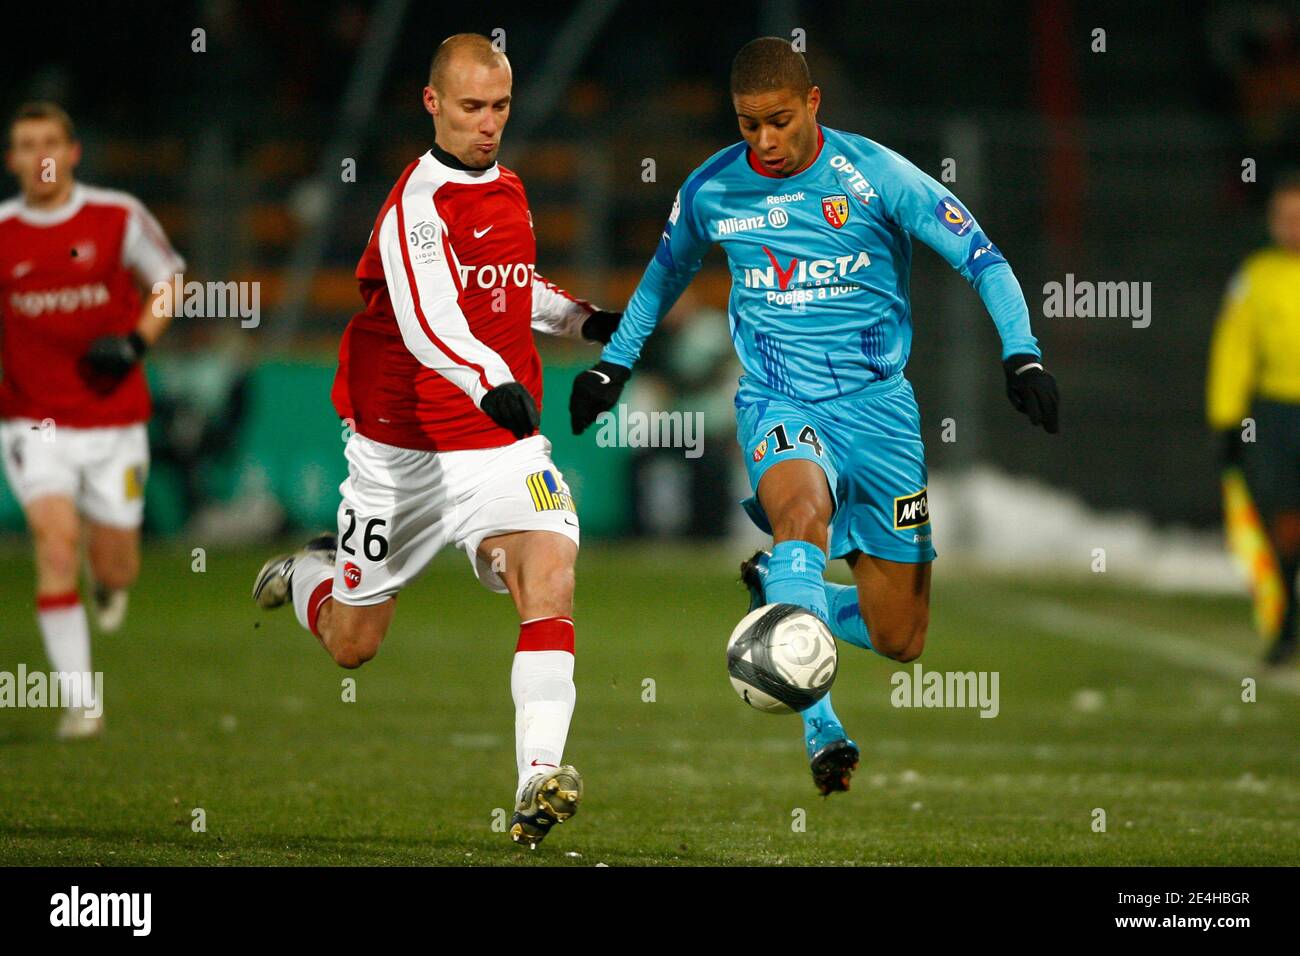 Valenciennes' Renaud Cohade fights for the ball with Lens' Kevin  Monnet-Paquet during the french first league soccer match between  Valenciennes FC (VAFC) and Racing Club de Lens (RCL) at Nungesser Stadium in